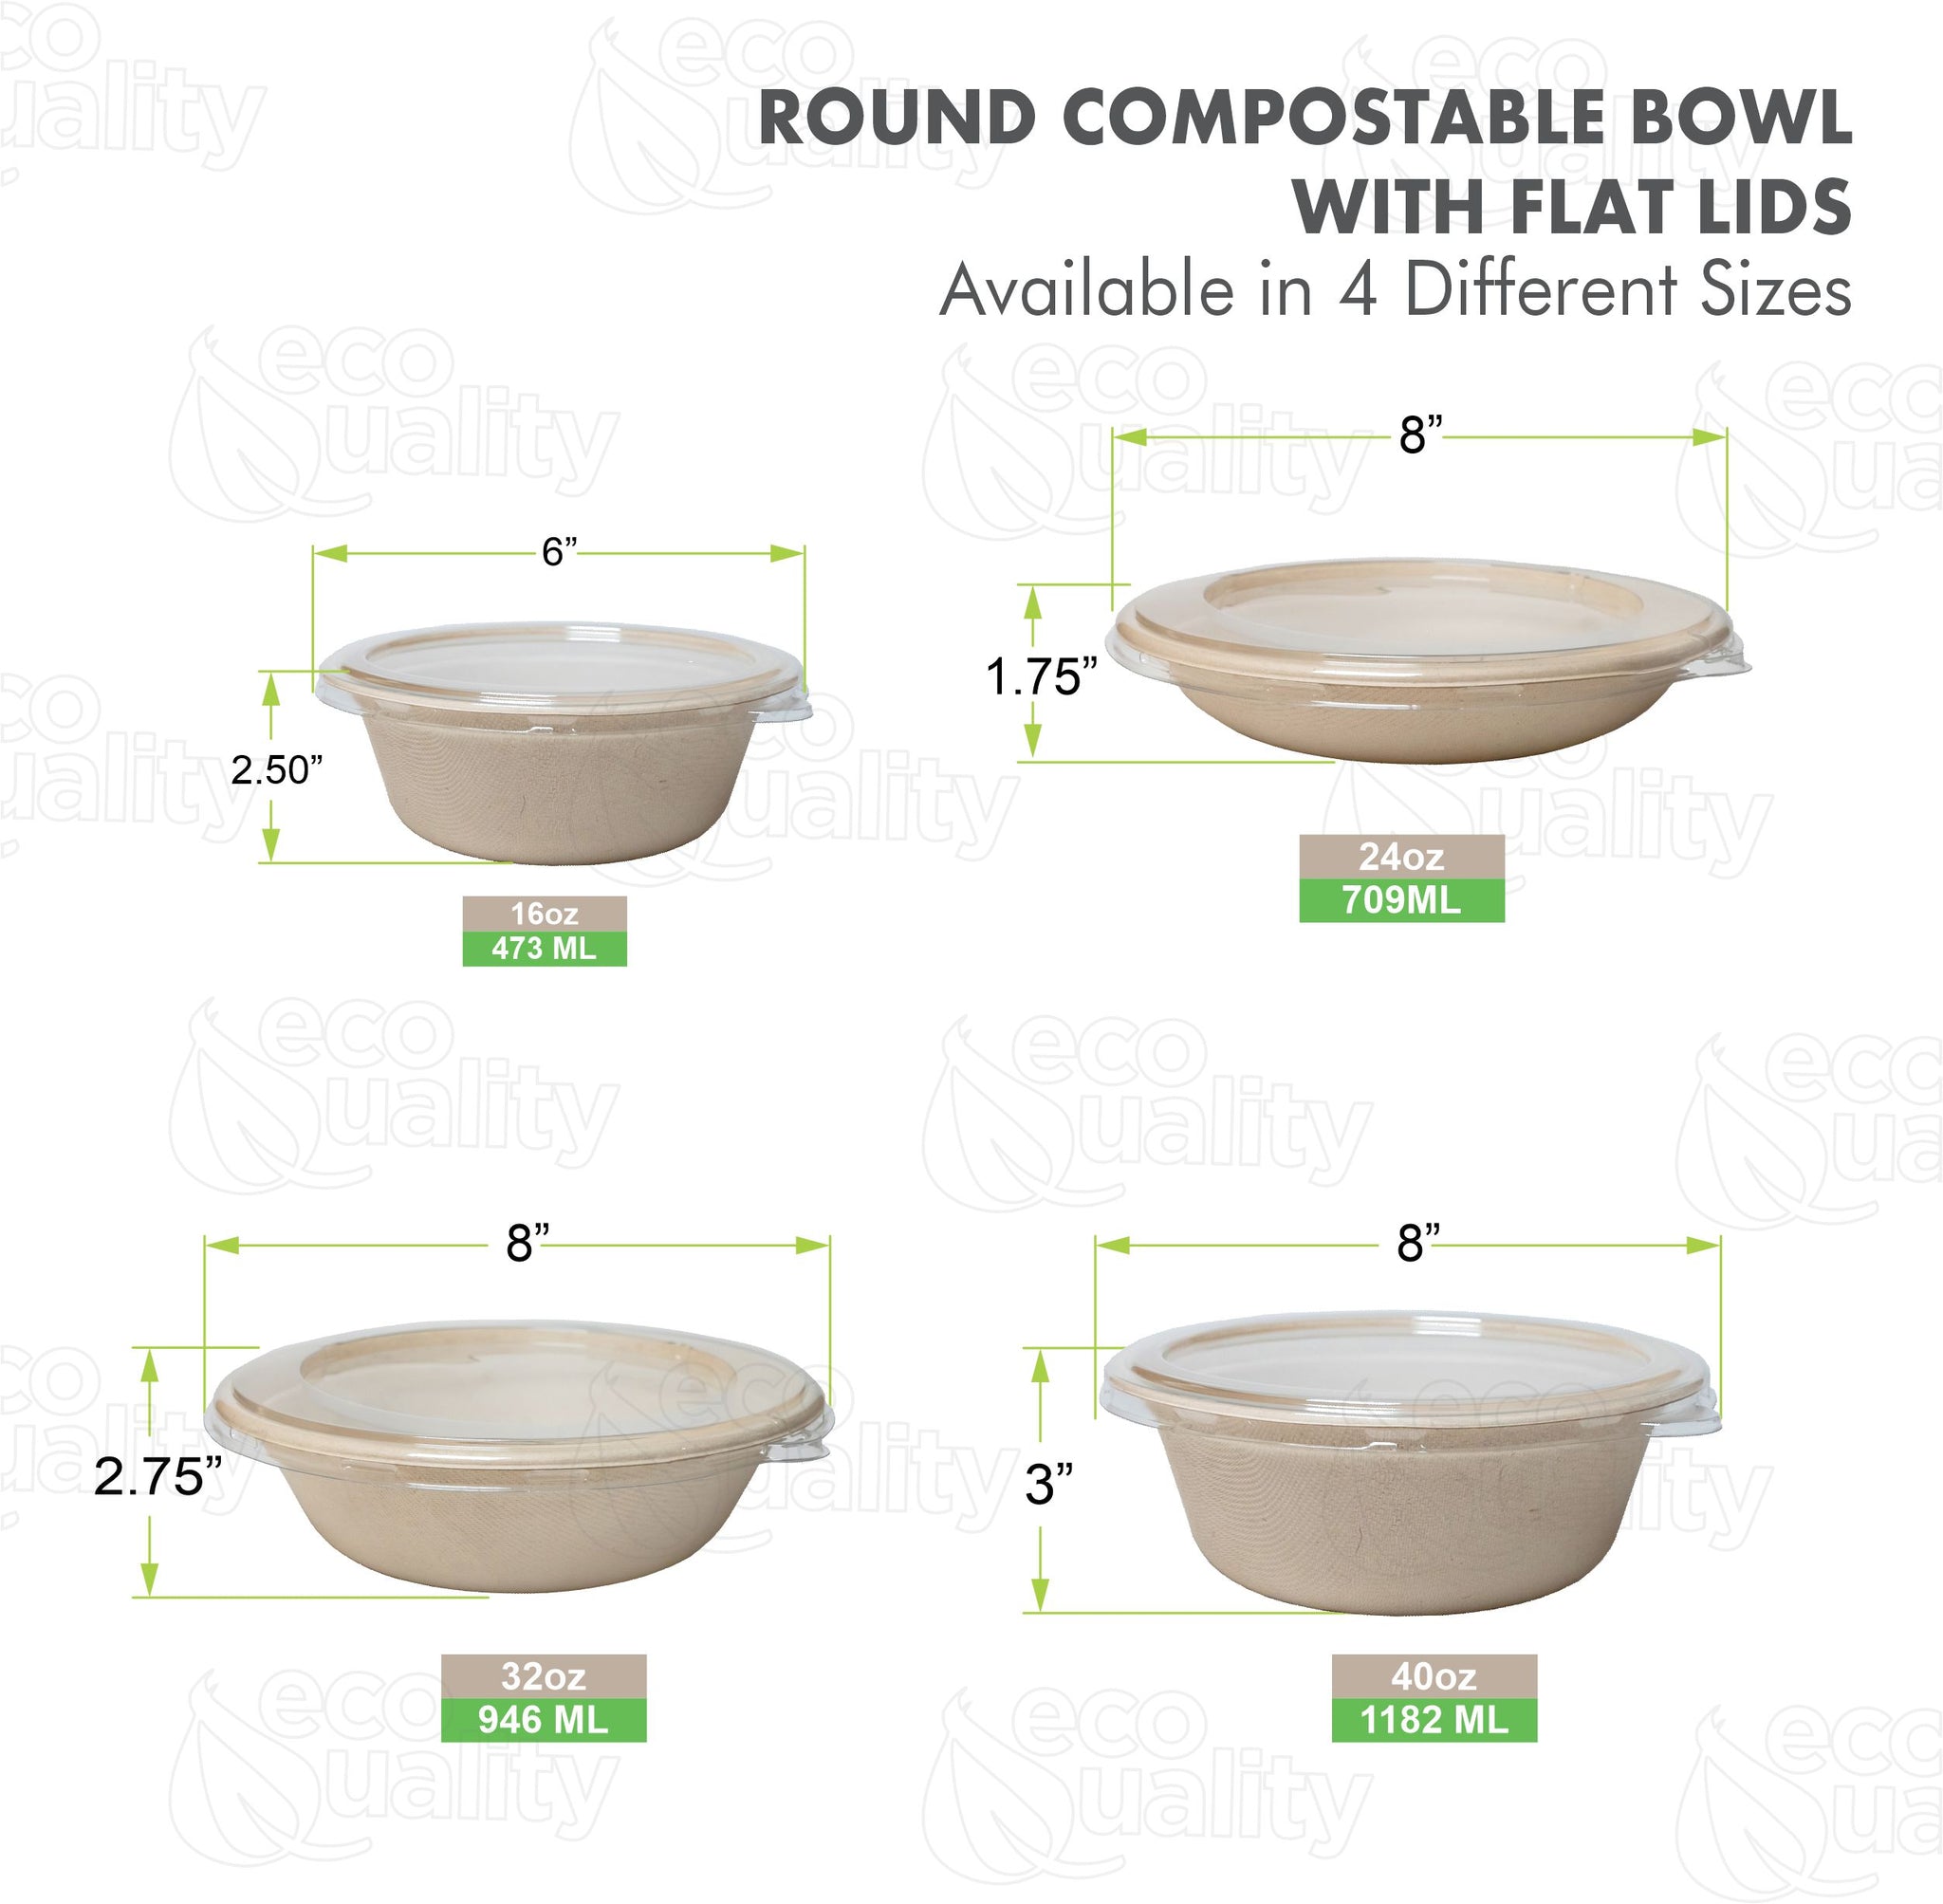 kraftbowl disposableproducts Microwavesafe LeakResistant bowl soupbowl Biodegradable Bowls sugarcane bowl ice cream bowl disposable bowl heavyduty bowl zerowaste ecofriendly plasticfree 24 ounces 24 oz breakfast bowl dinner bowl lunch bowl poke bowl with lid acai bowl 16oz 32oz 40oz bowls with lid takeout service rice catering burrito bowls with snapping lid 